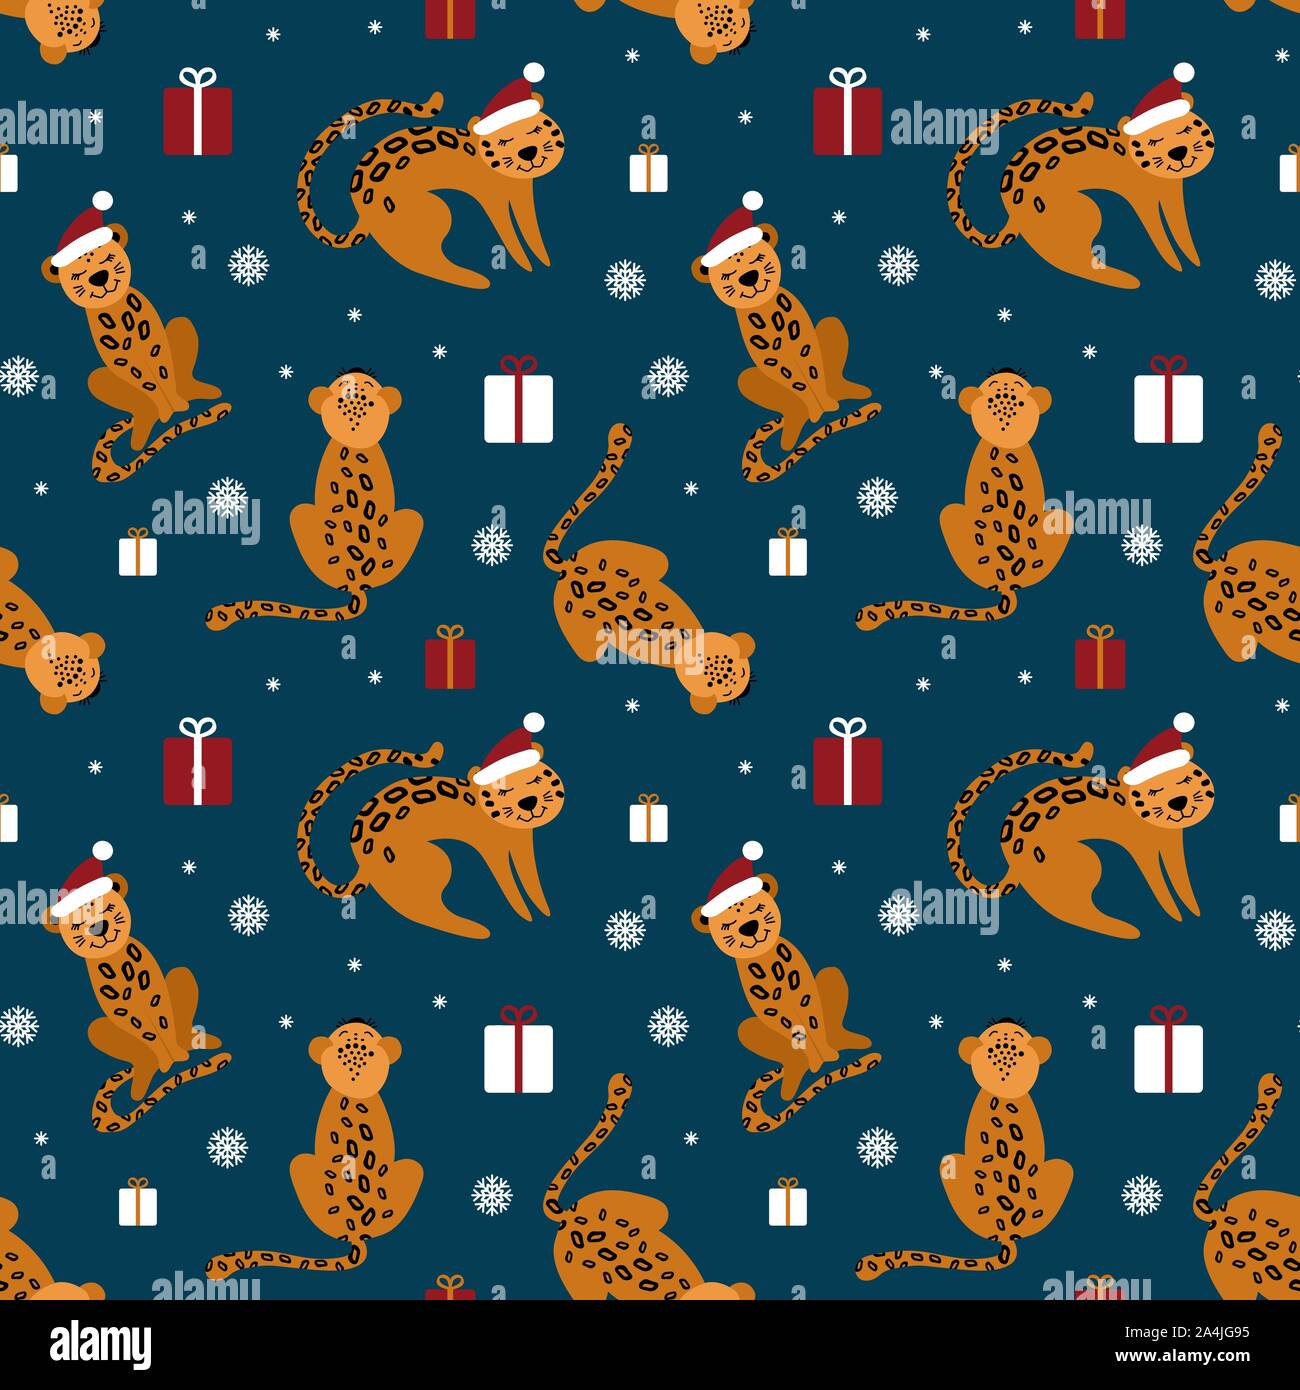 Christmas seamless pattern with cute leopards. Funny african animals with presents and snowflakes on dark background. Flat vector illustartion. Stock Vector